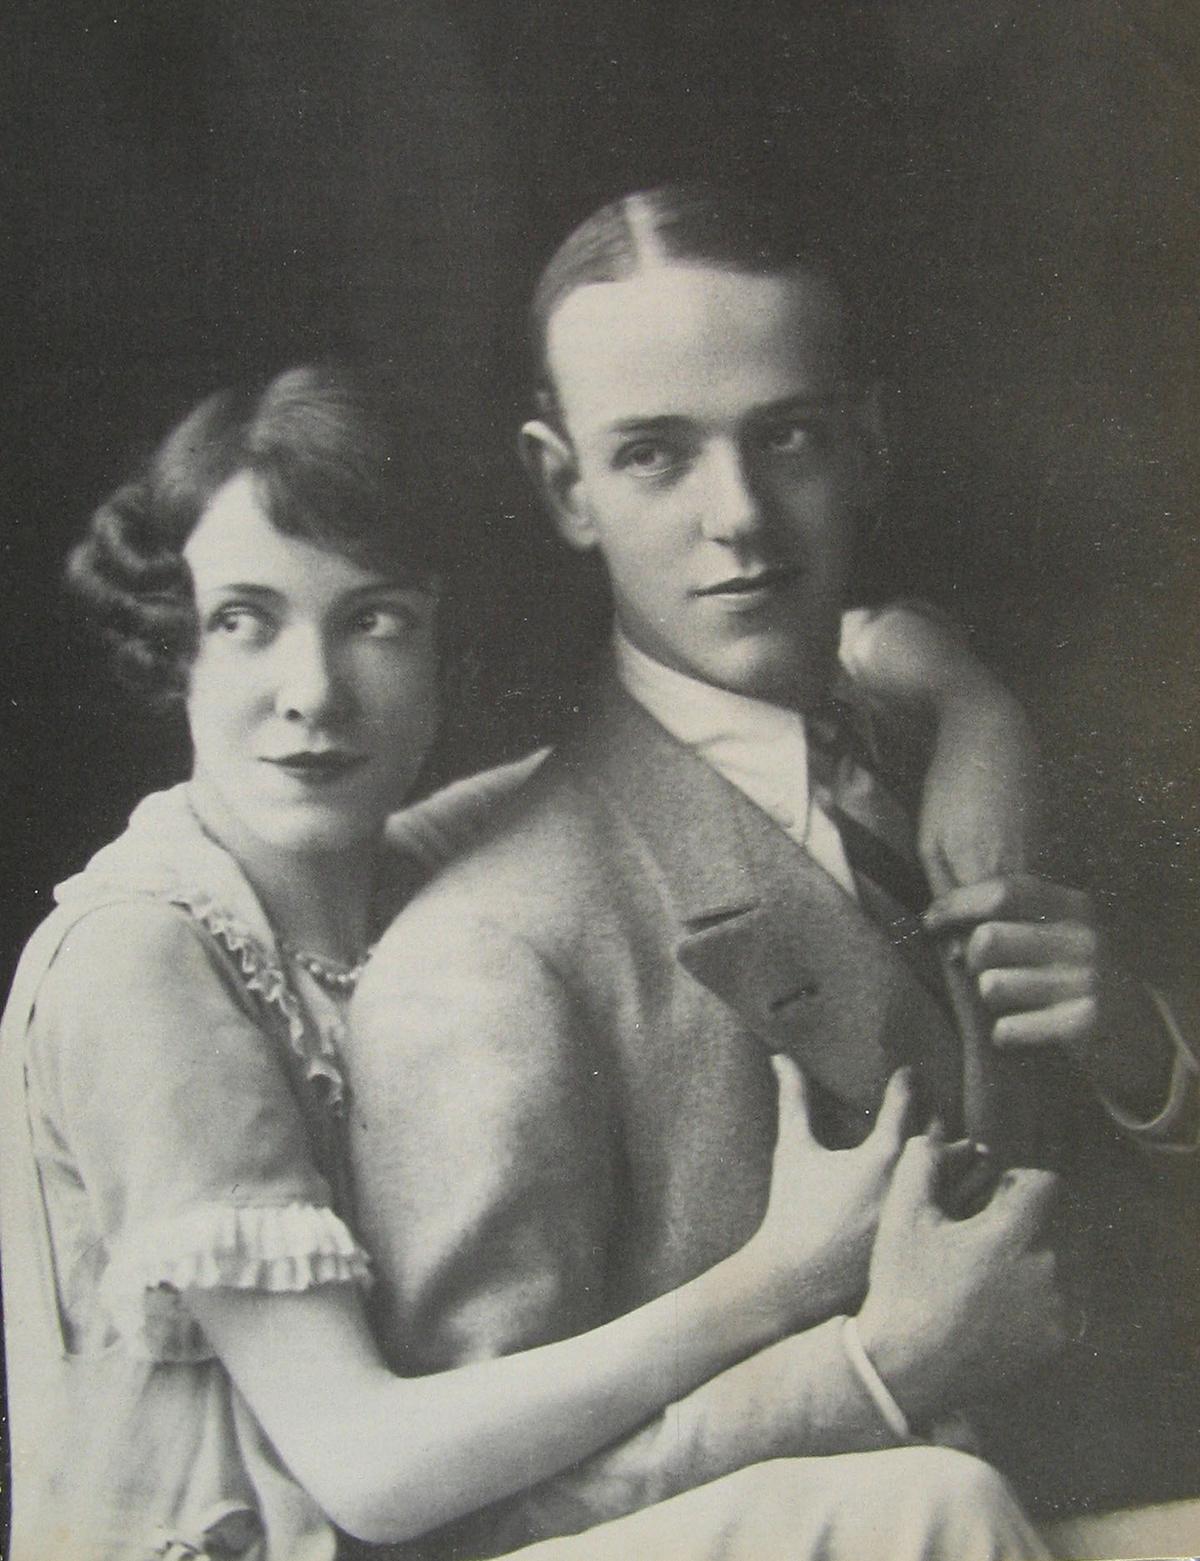 WhenAdele was 8 and Fred, 5, their mother enrolled them in a theater school in New York.A publicity photograph of Fred and Adele Astaire, 1919. (Public Domain)